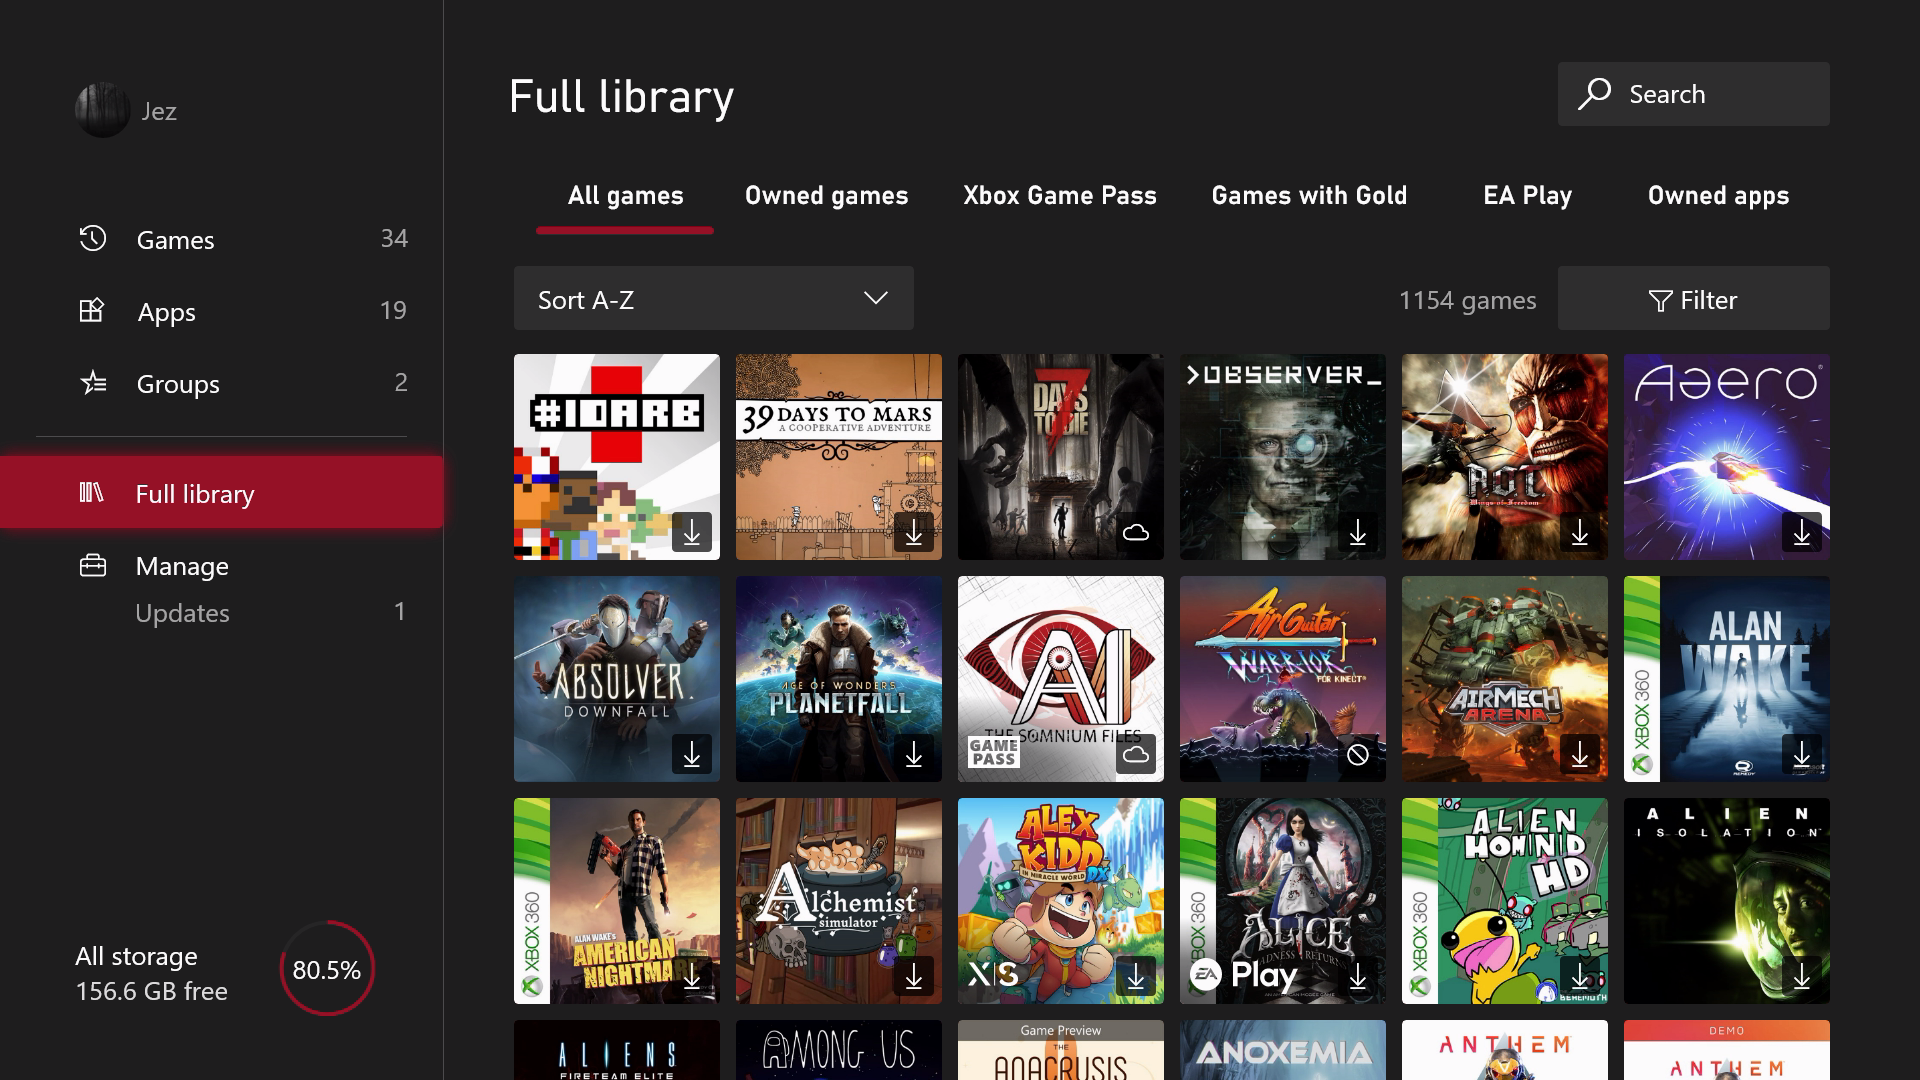 Xbox Full Games & Apps library, redesigned as of August 2022